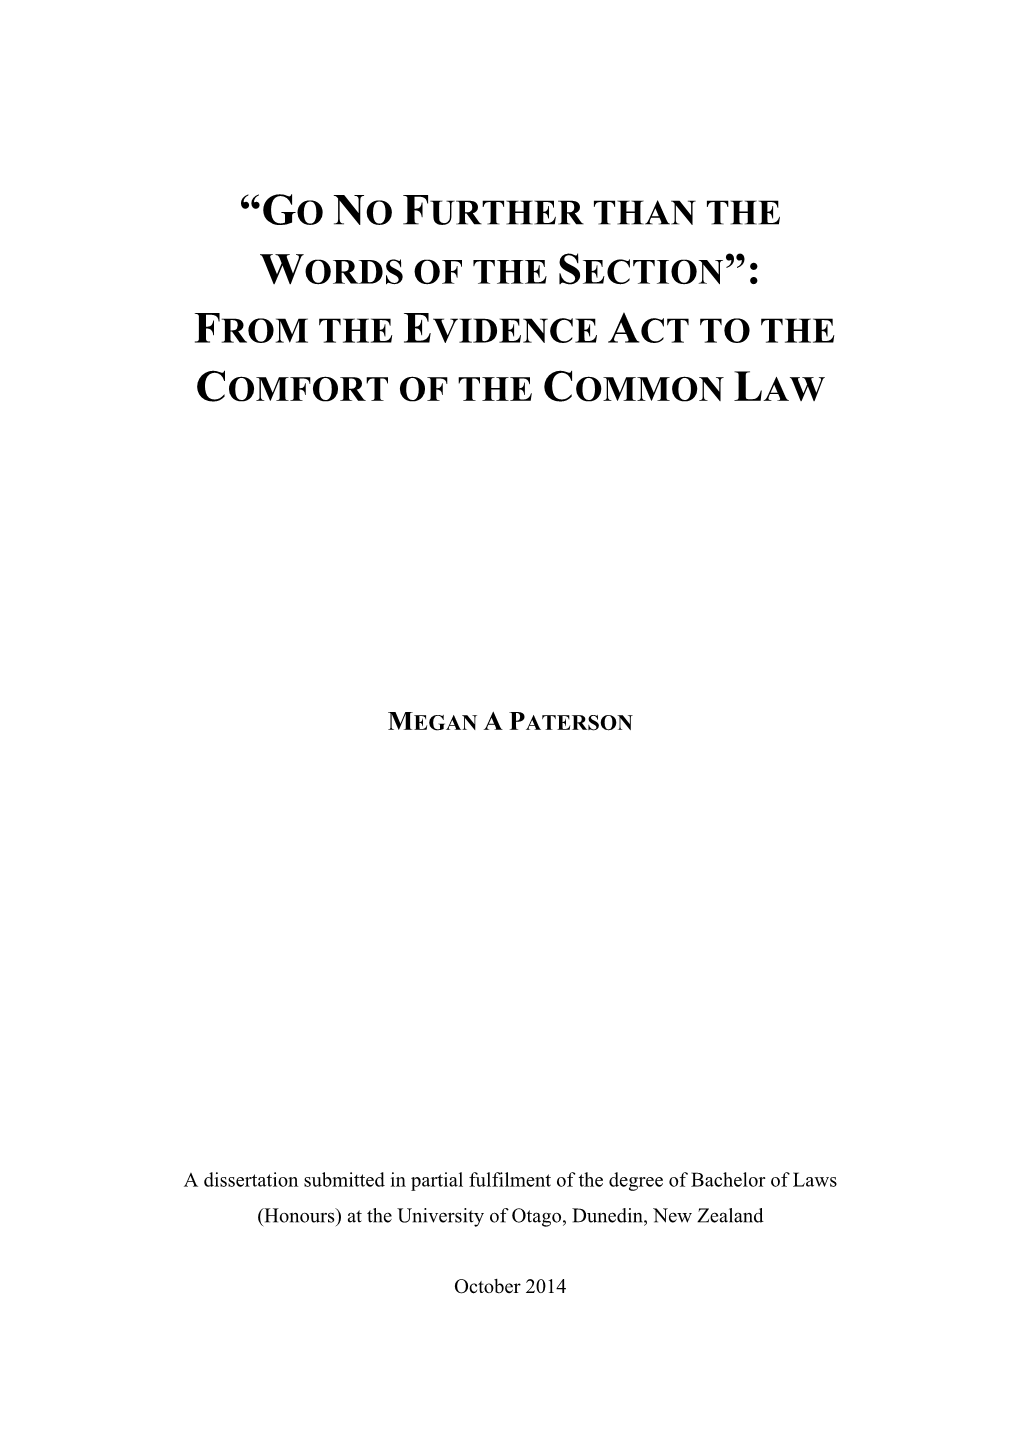 “Go No Further Than the Words of the Section”: from the Evidence Act to the Comfort of the Common Law